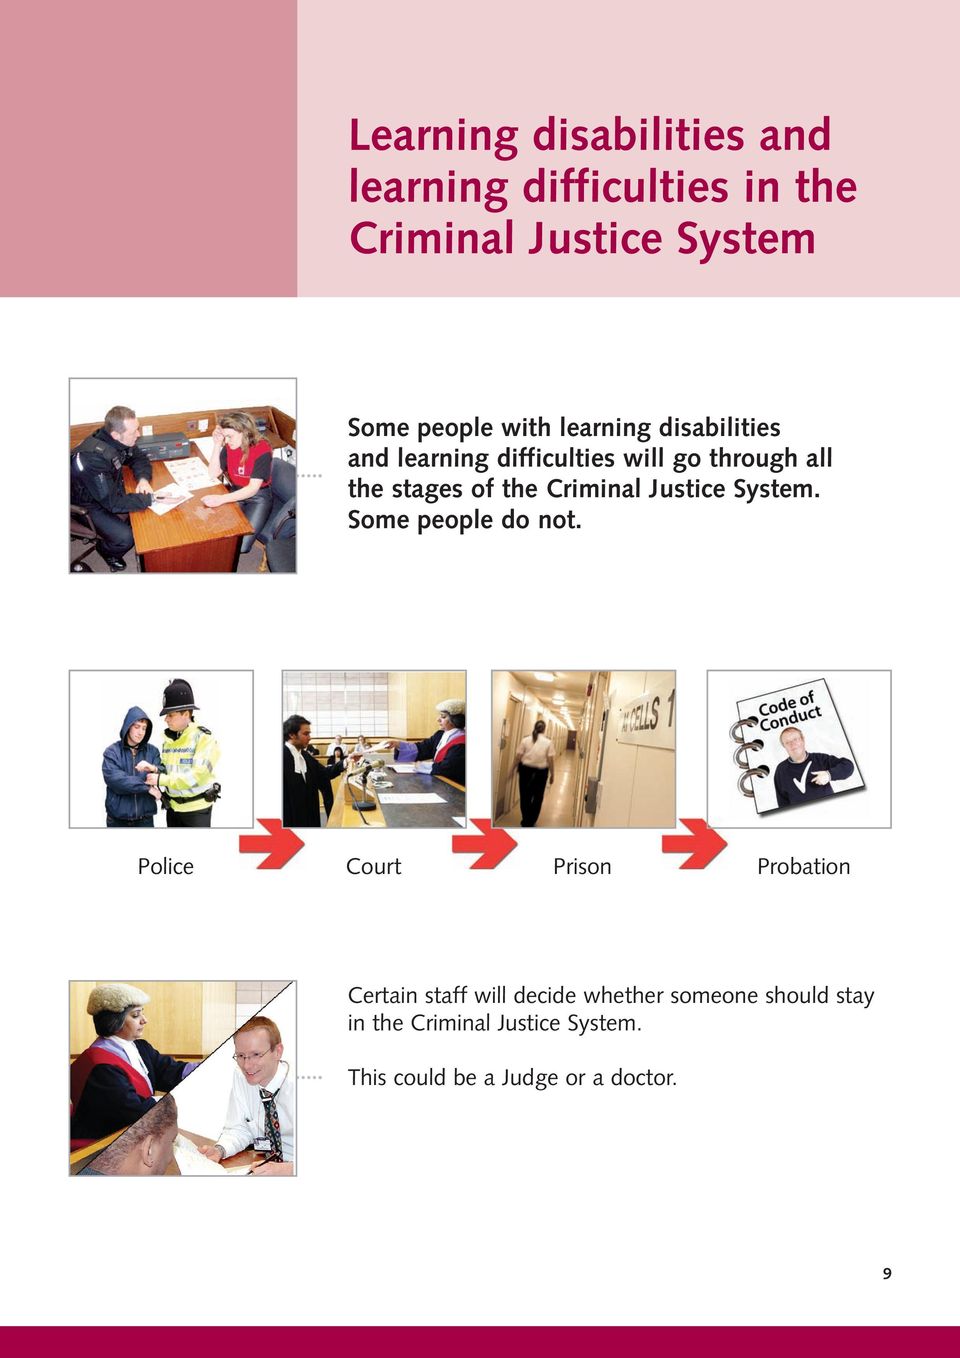 Criminal Justice System. Some people do not.